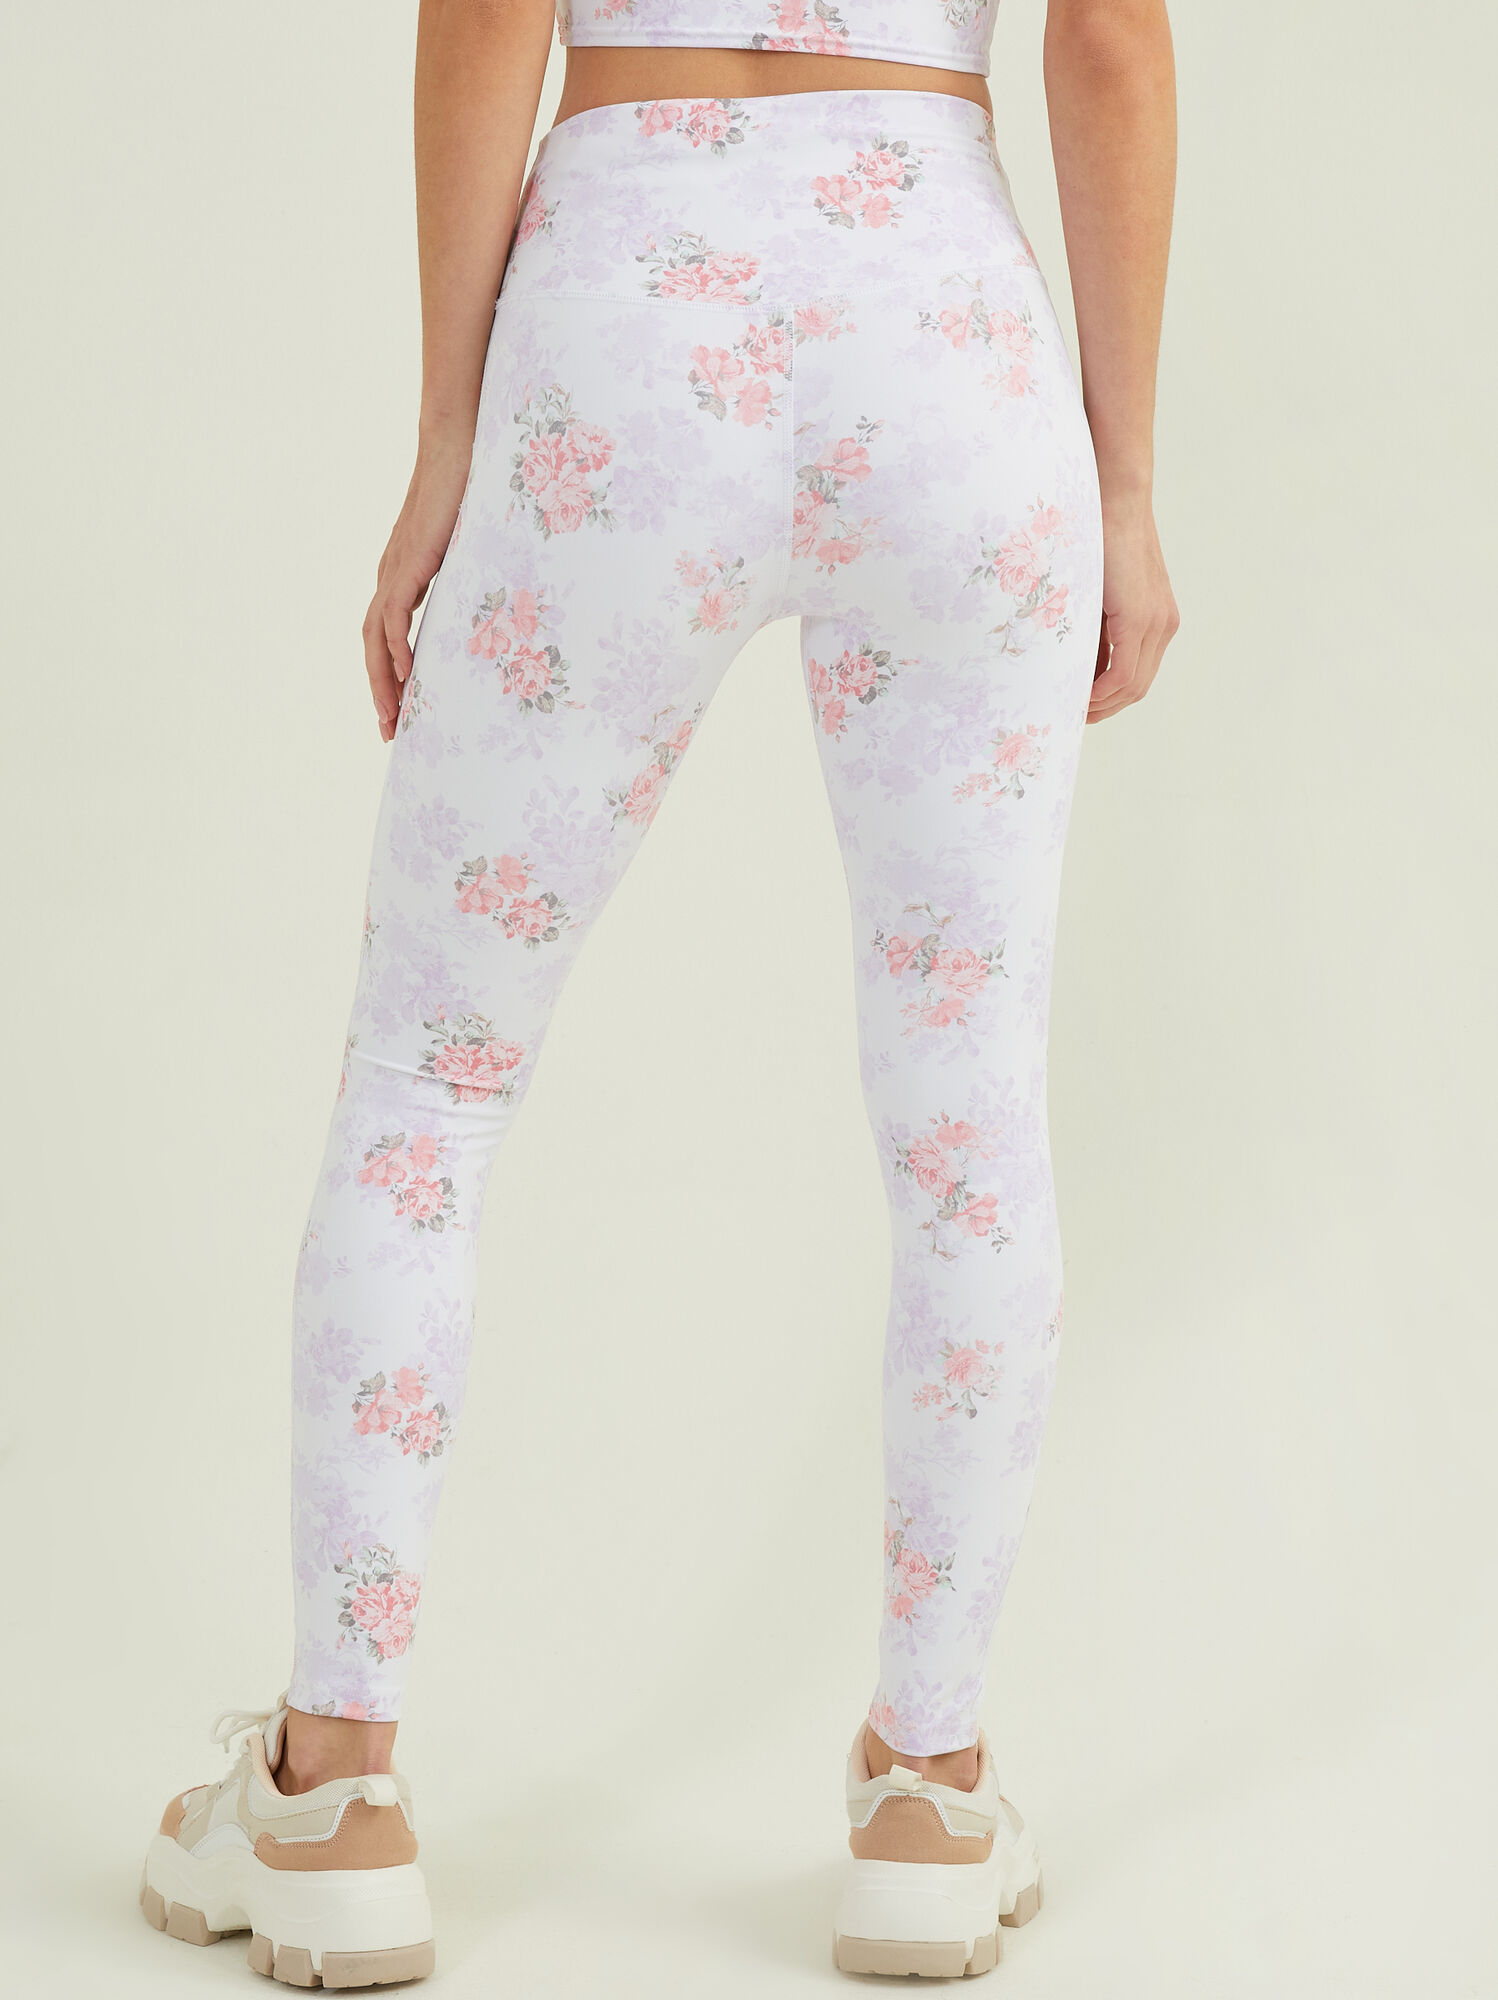 All Clear White Floral Leggings